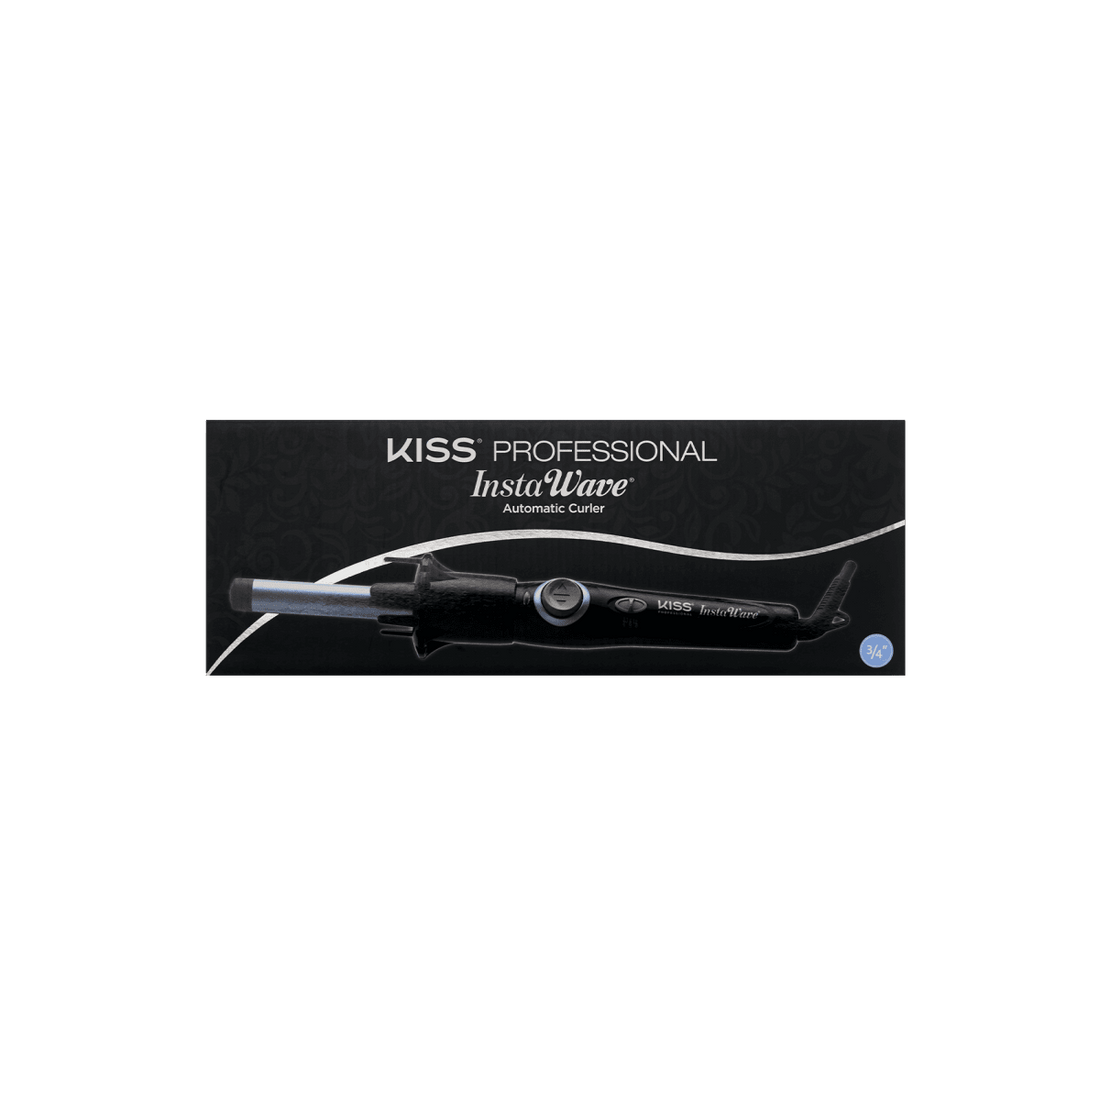 KISS Professional Instawave Blue Automatic Curler ¾”